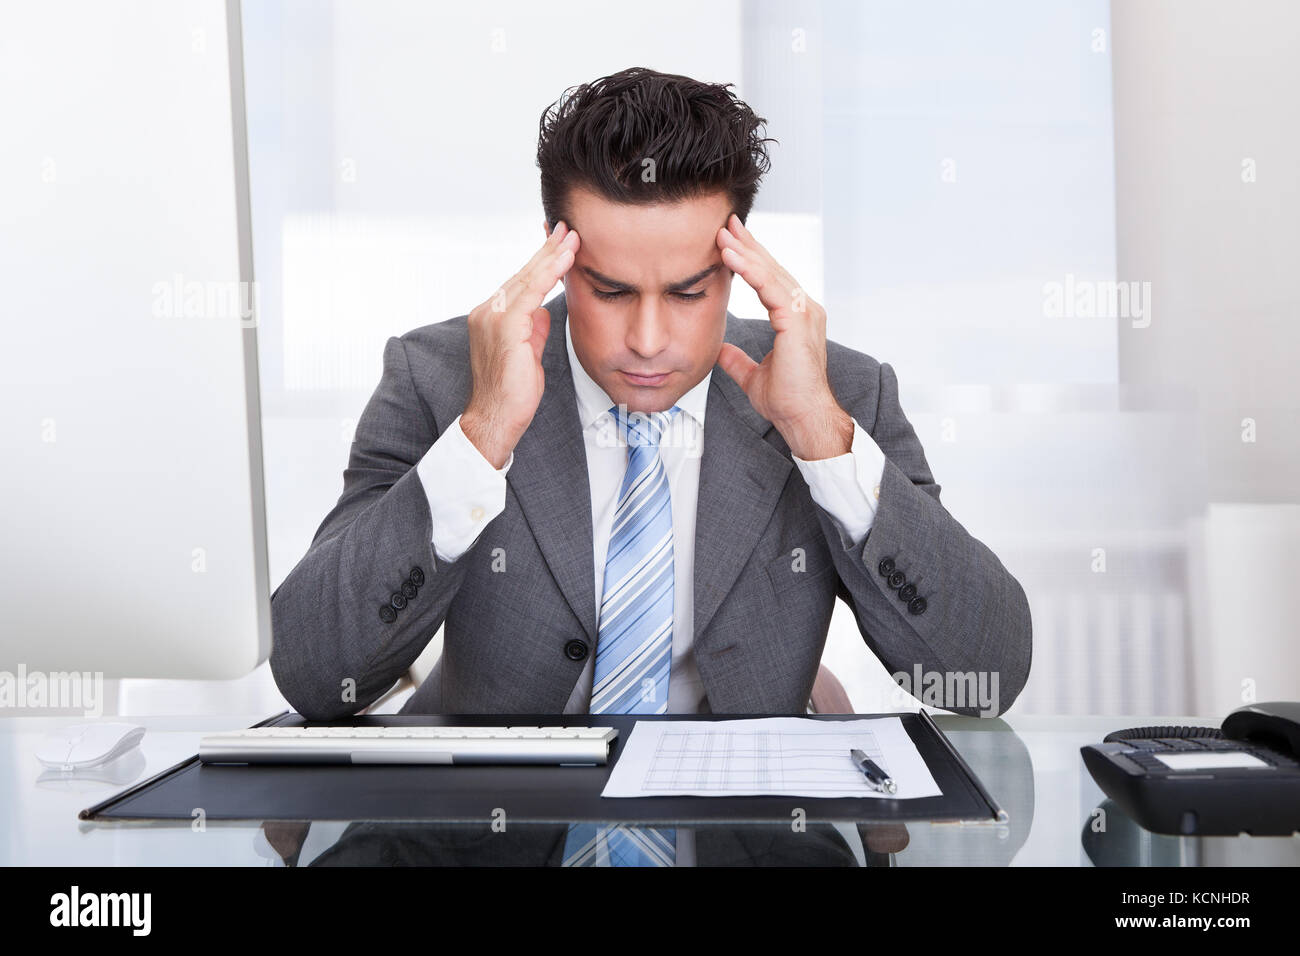 Portrait Of A Stressed Businessman Sitting At Desk Stock Photo